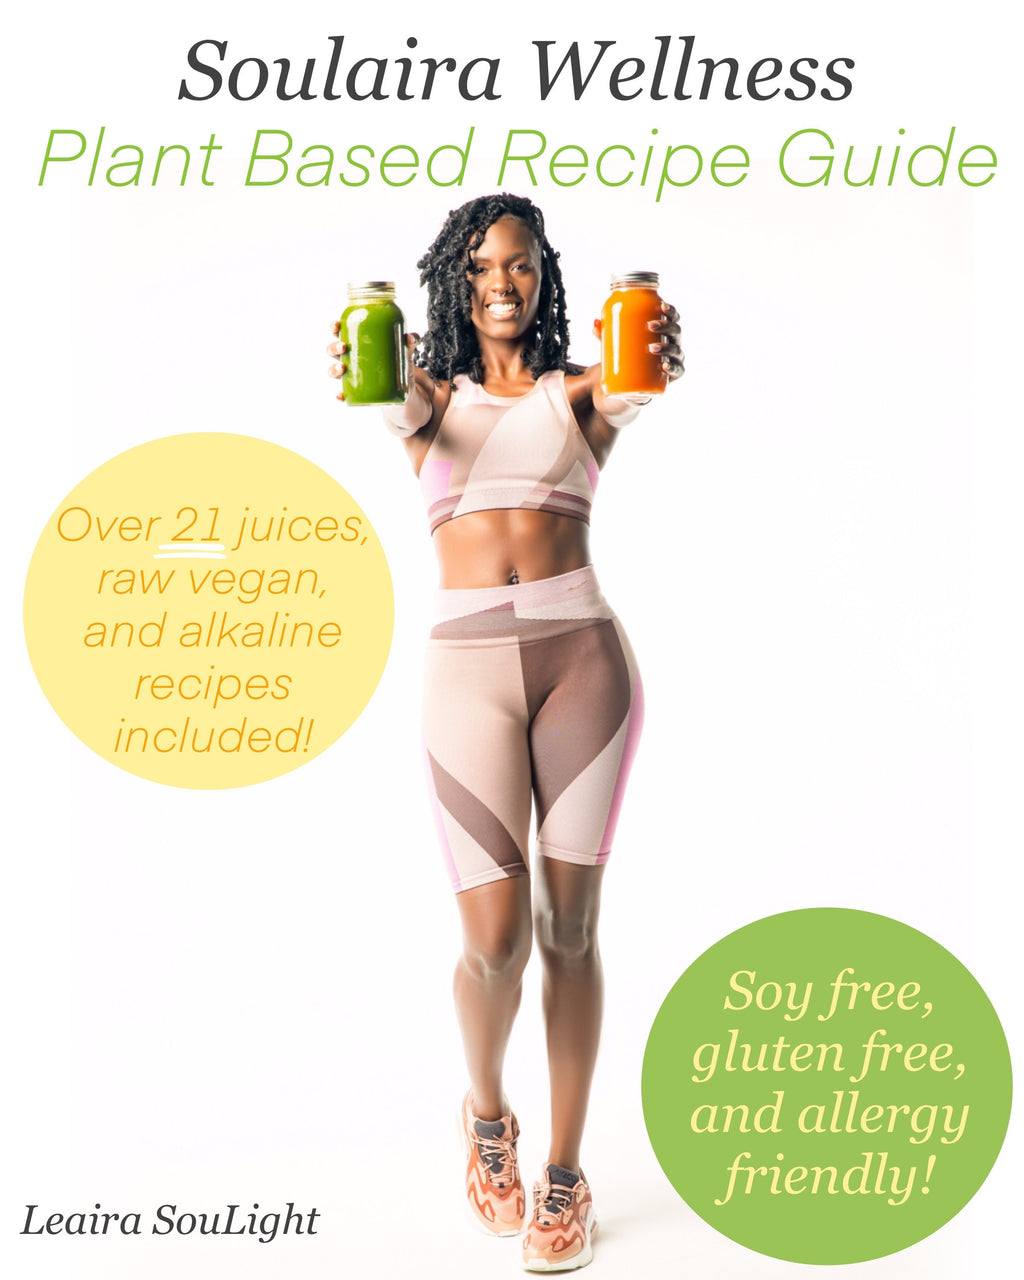 Plant Based Recipe Guide